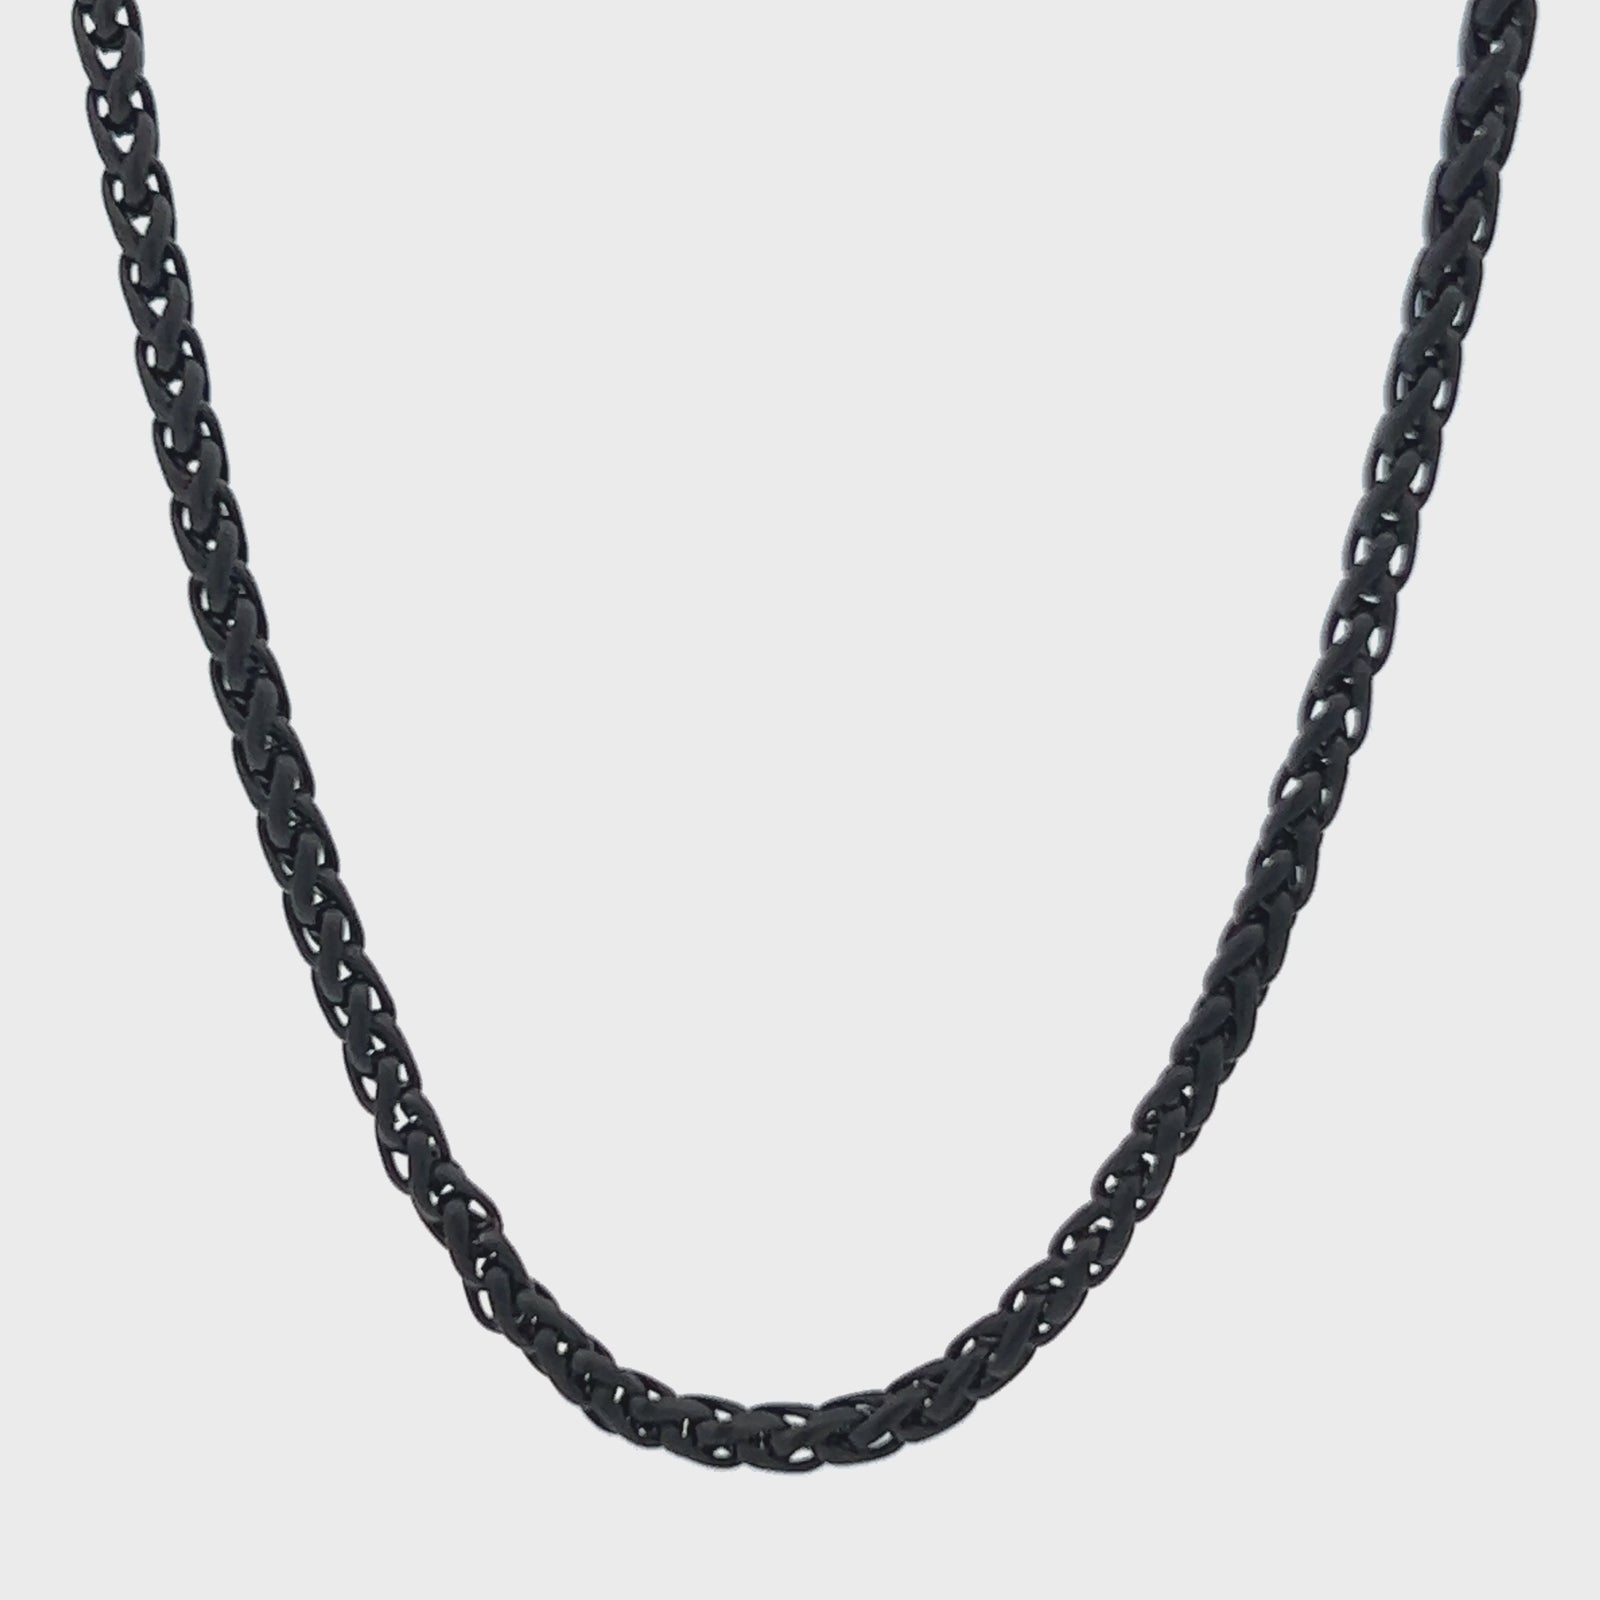 Chanel Chunky Rolo Chain Necklace in Burnt Orange